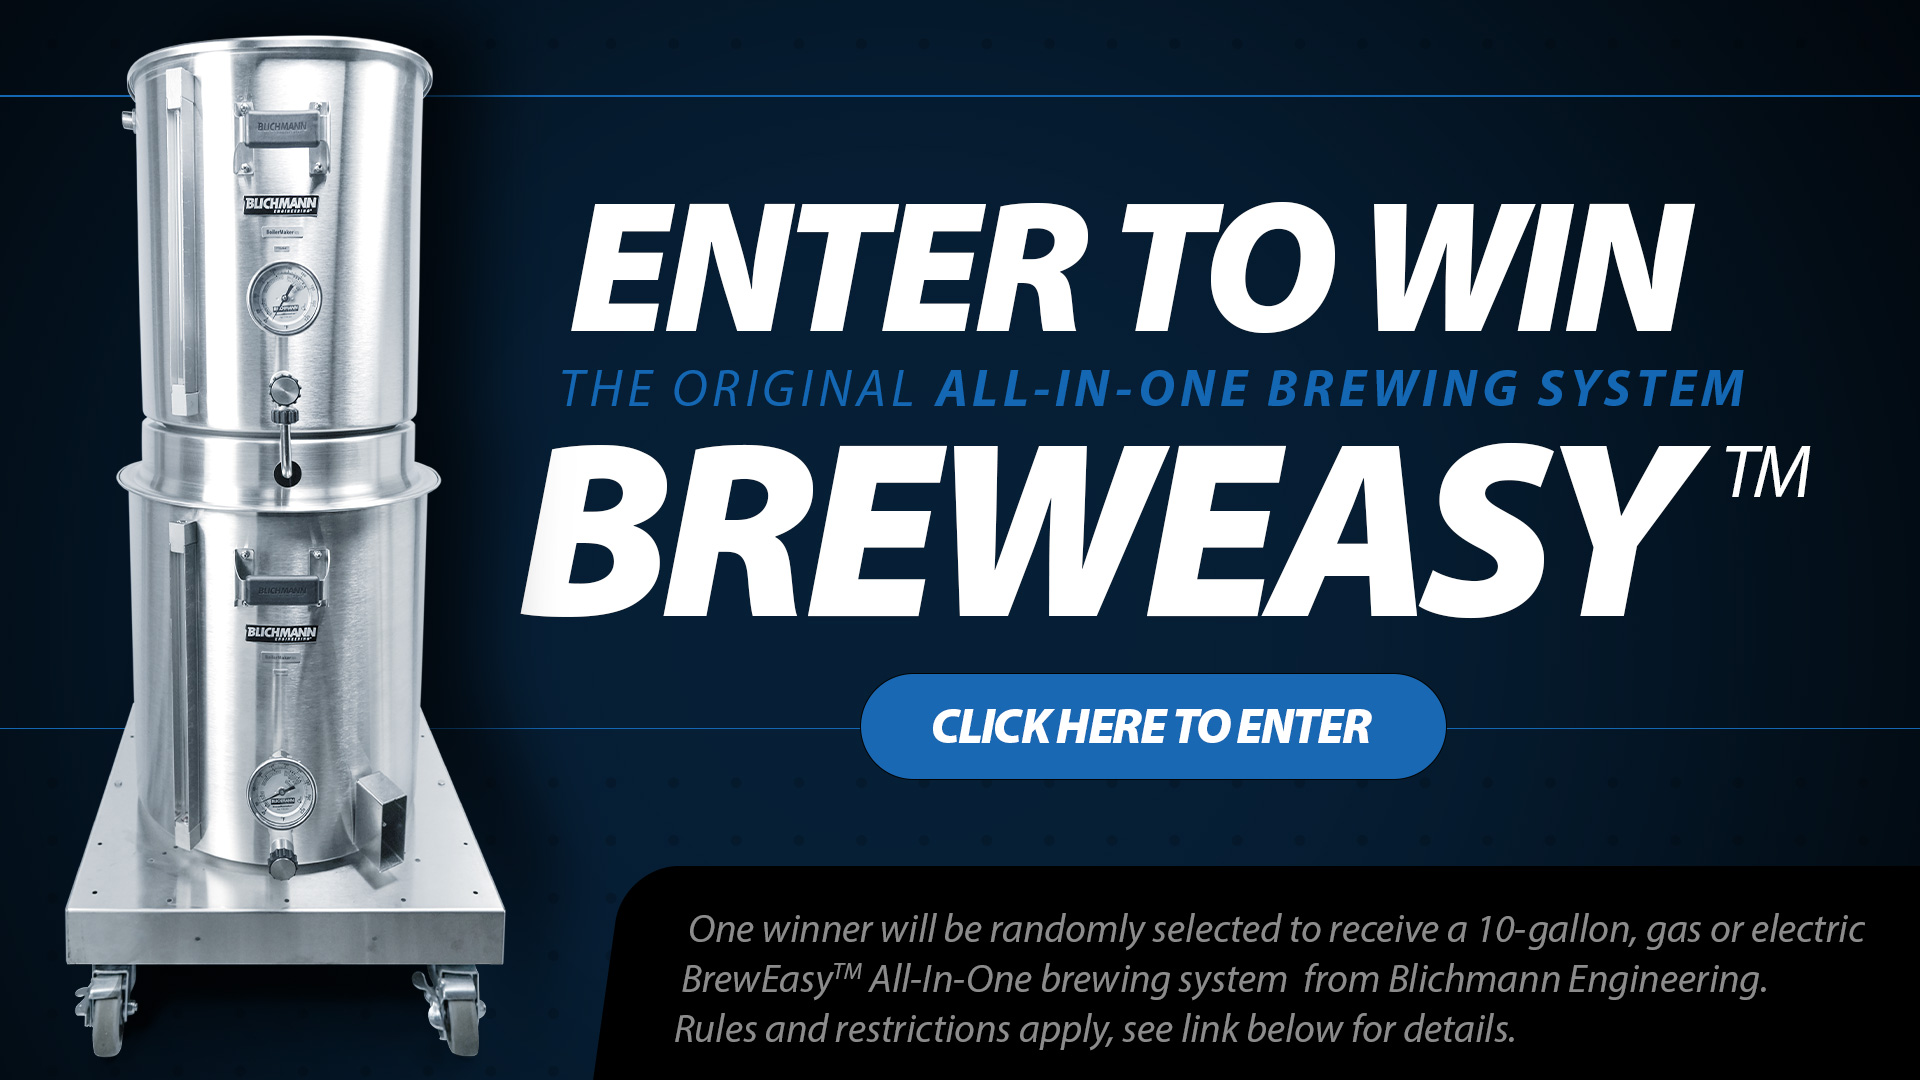 Enter to Win a BrewEasy All-In-One system from Blichmann Engineering